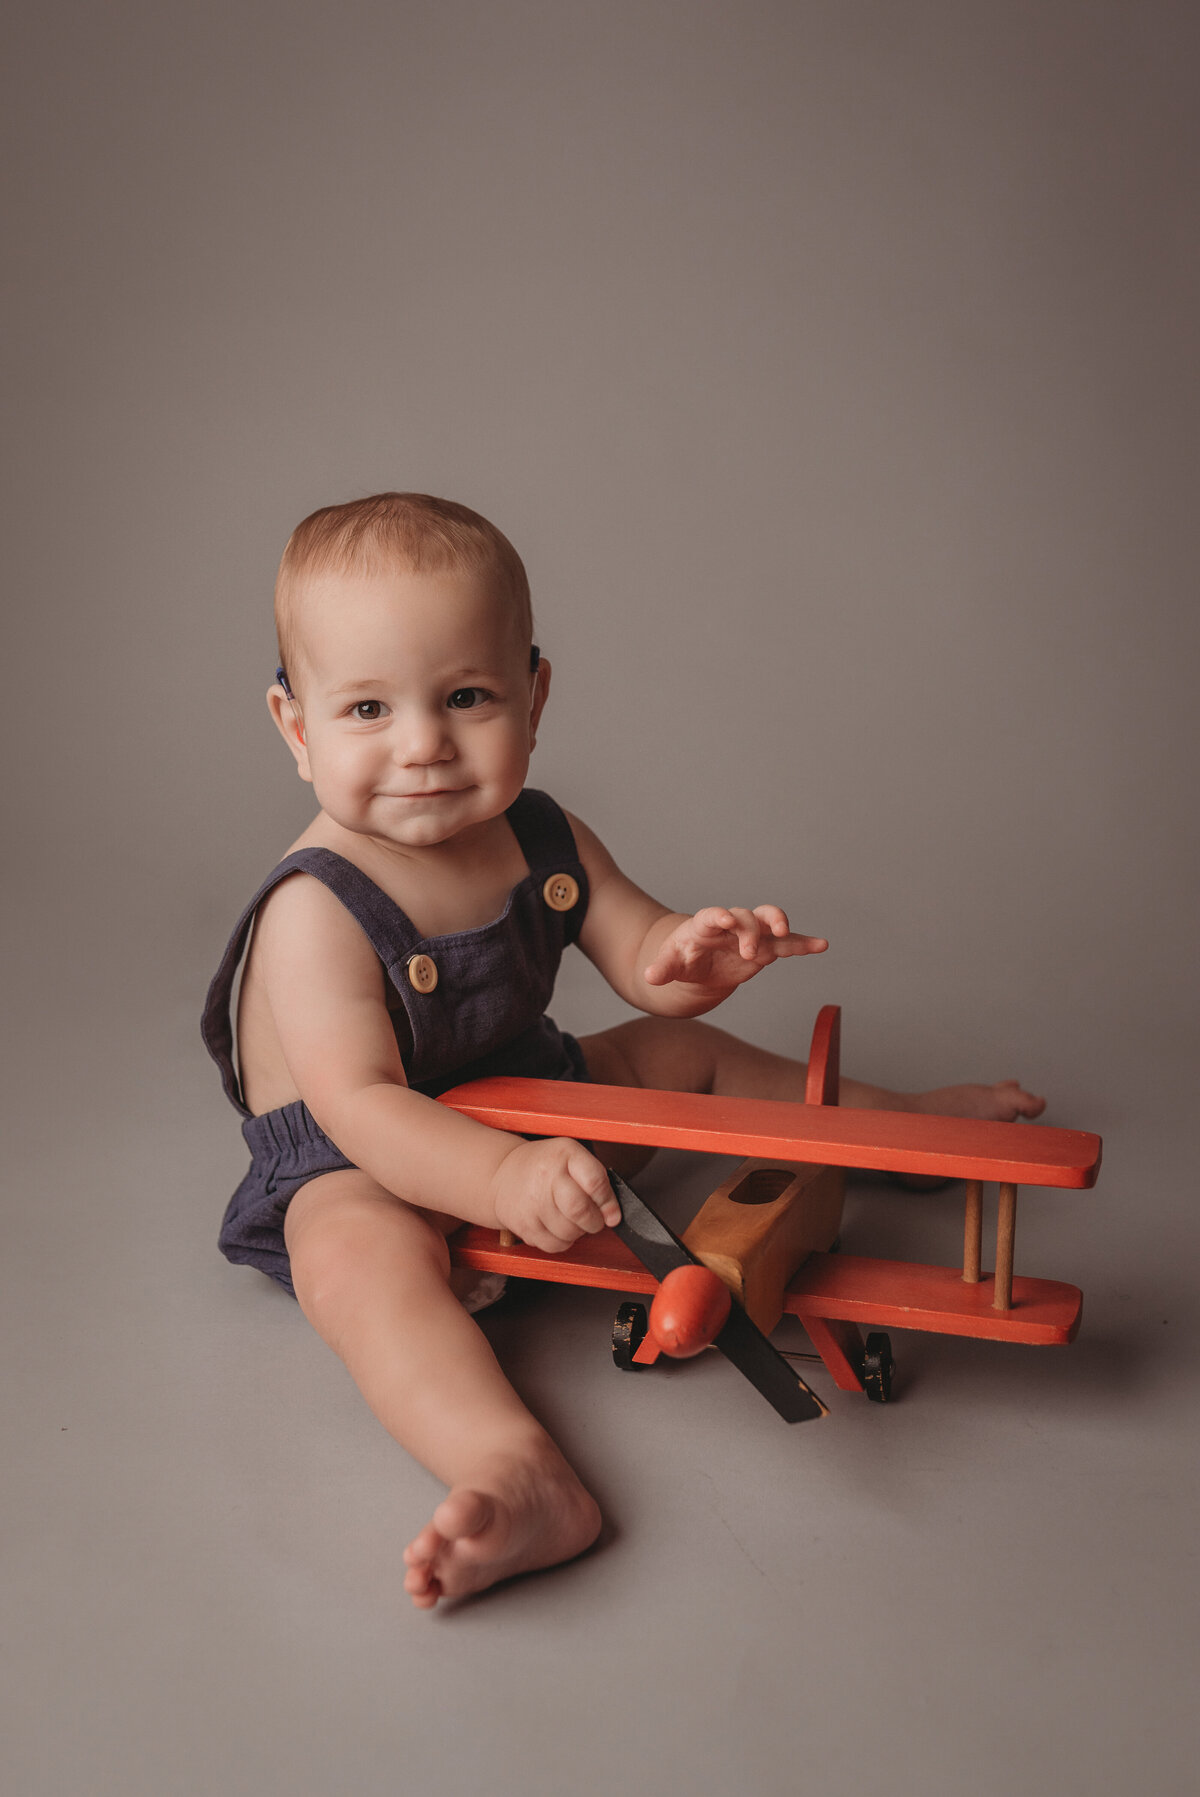 One year old boy sitting on gray backdrop wearing navy blue romper holding a wooden toy airplane